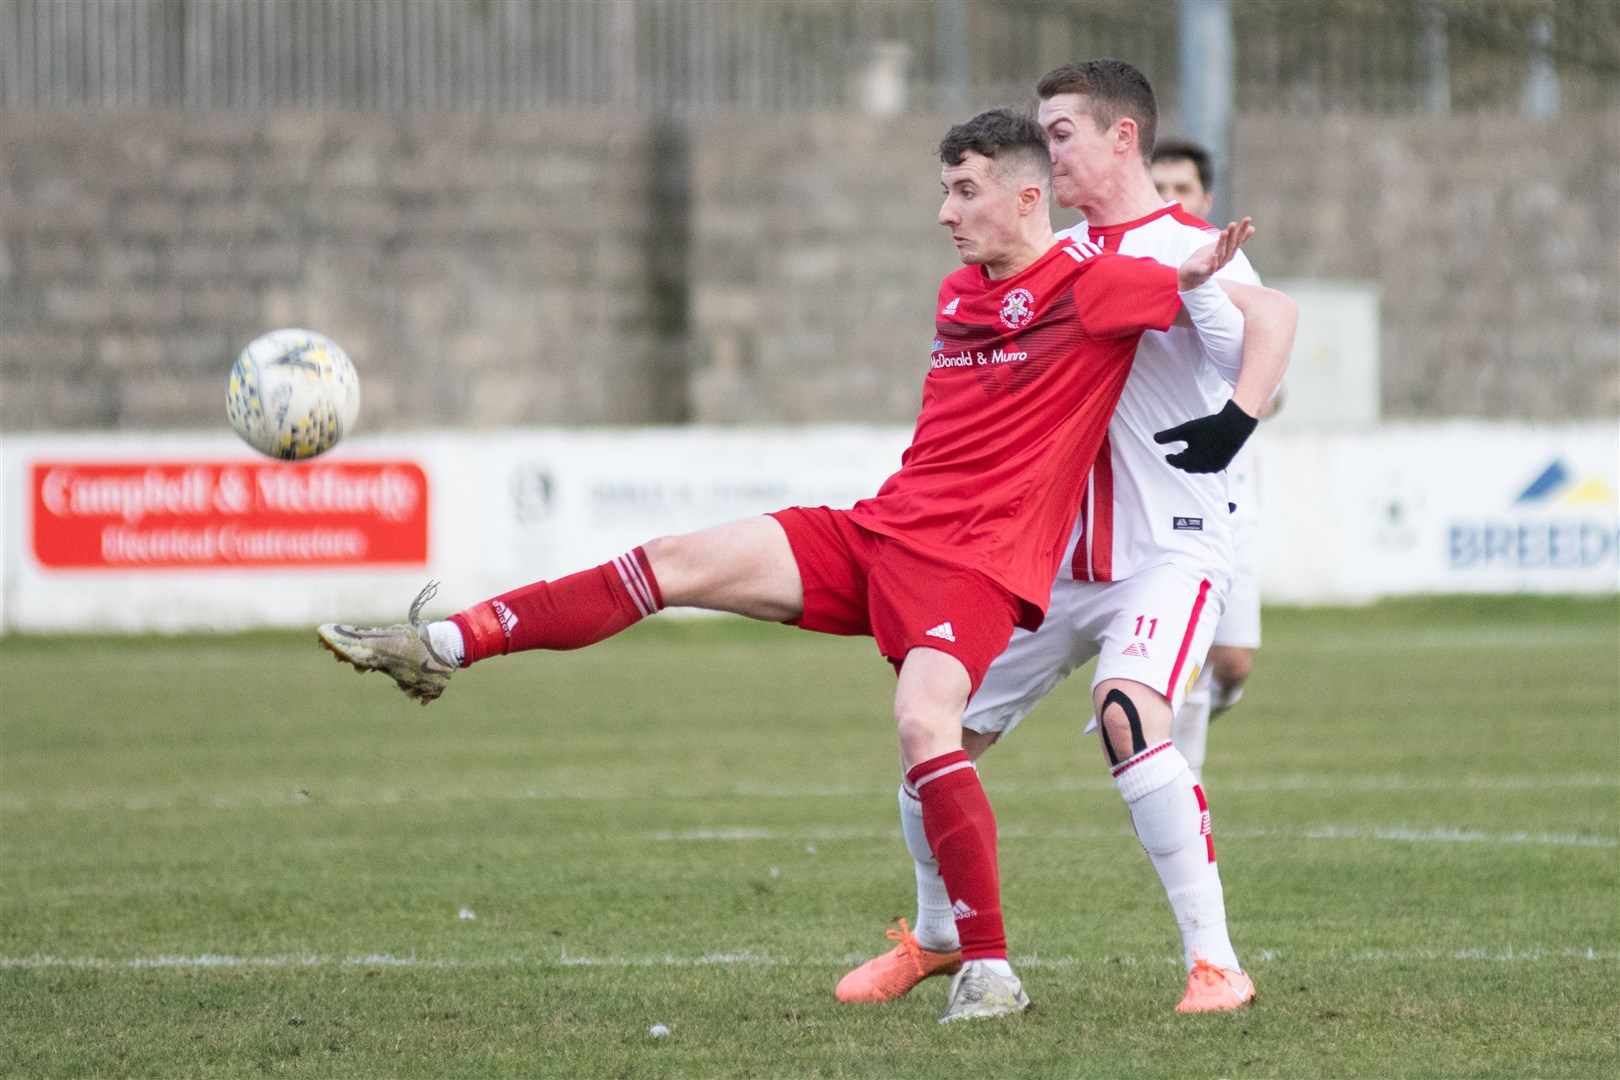 Lossiemouth midfielder Ross Morrison in action against Brechin City...Picture: Daniel Forsyth